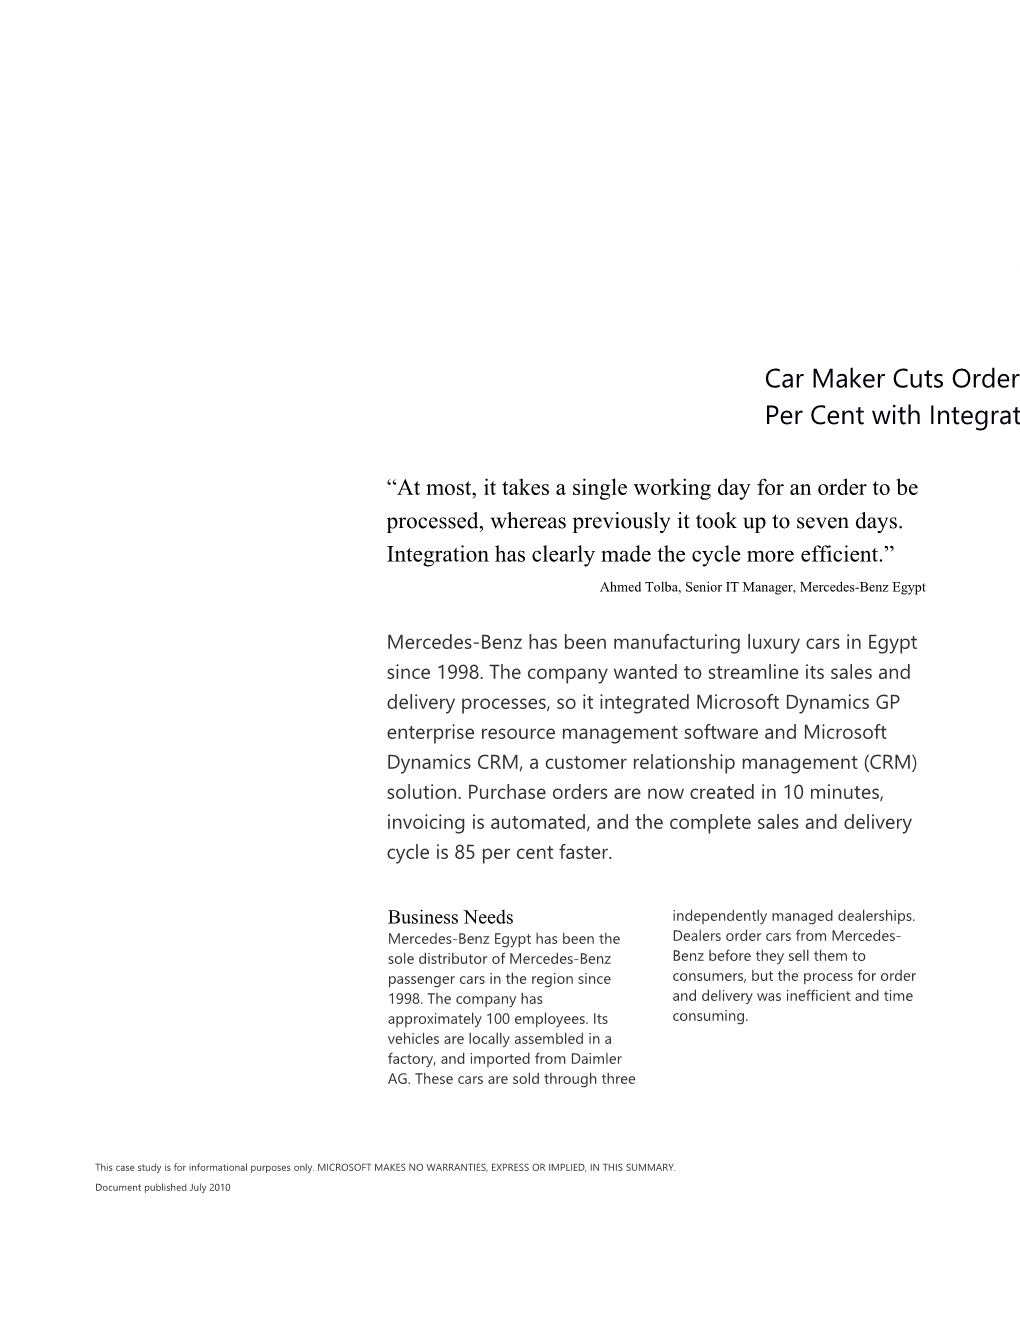 Writeimage CSB Car Maker Cuts Order Fulfilment Time by 85 Per Cent with Integrated IT